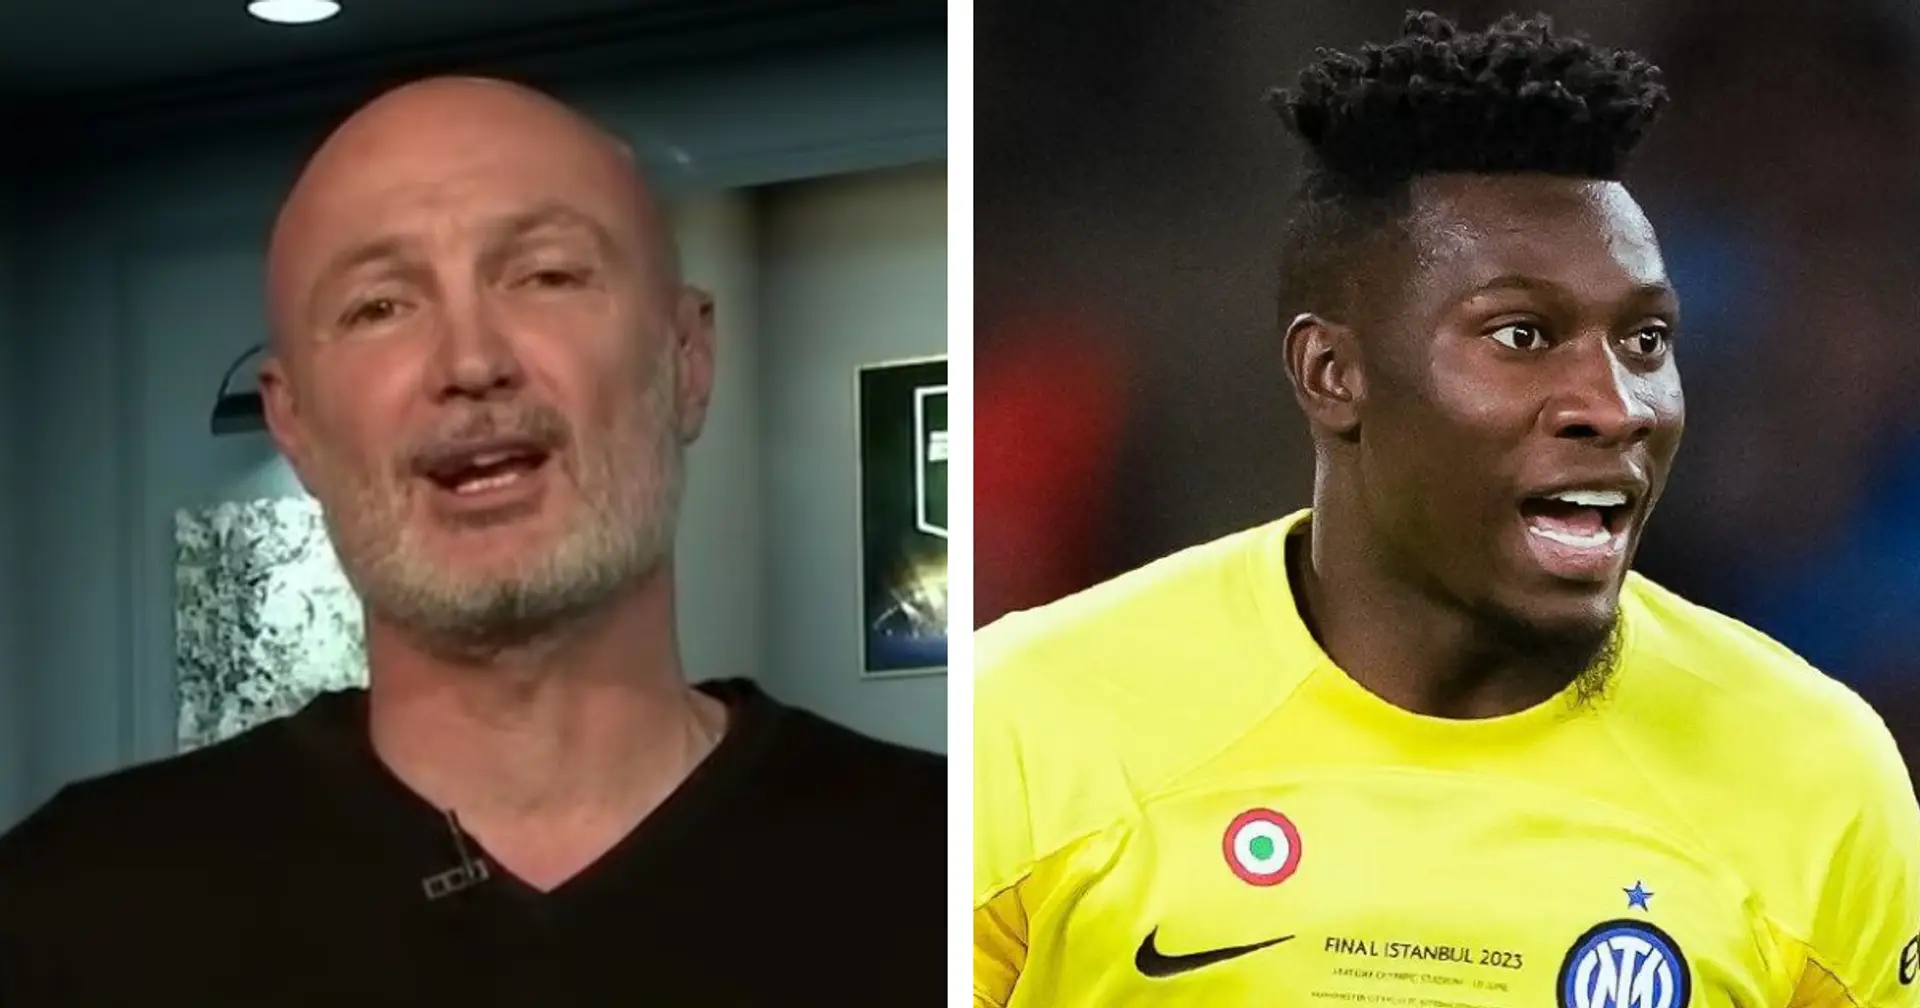 'Two targets you have to go for': Chelsea urged to sign one of two goalkeepers - one is Andre Onana